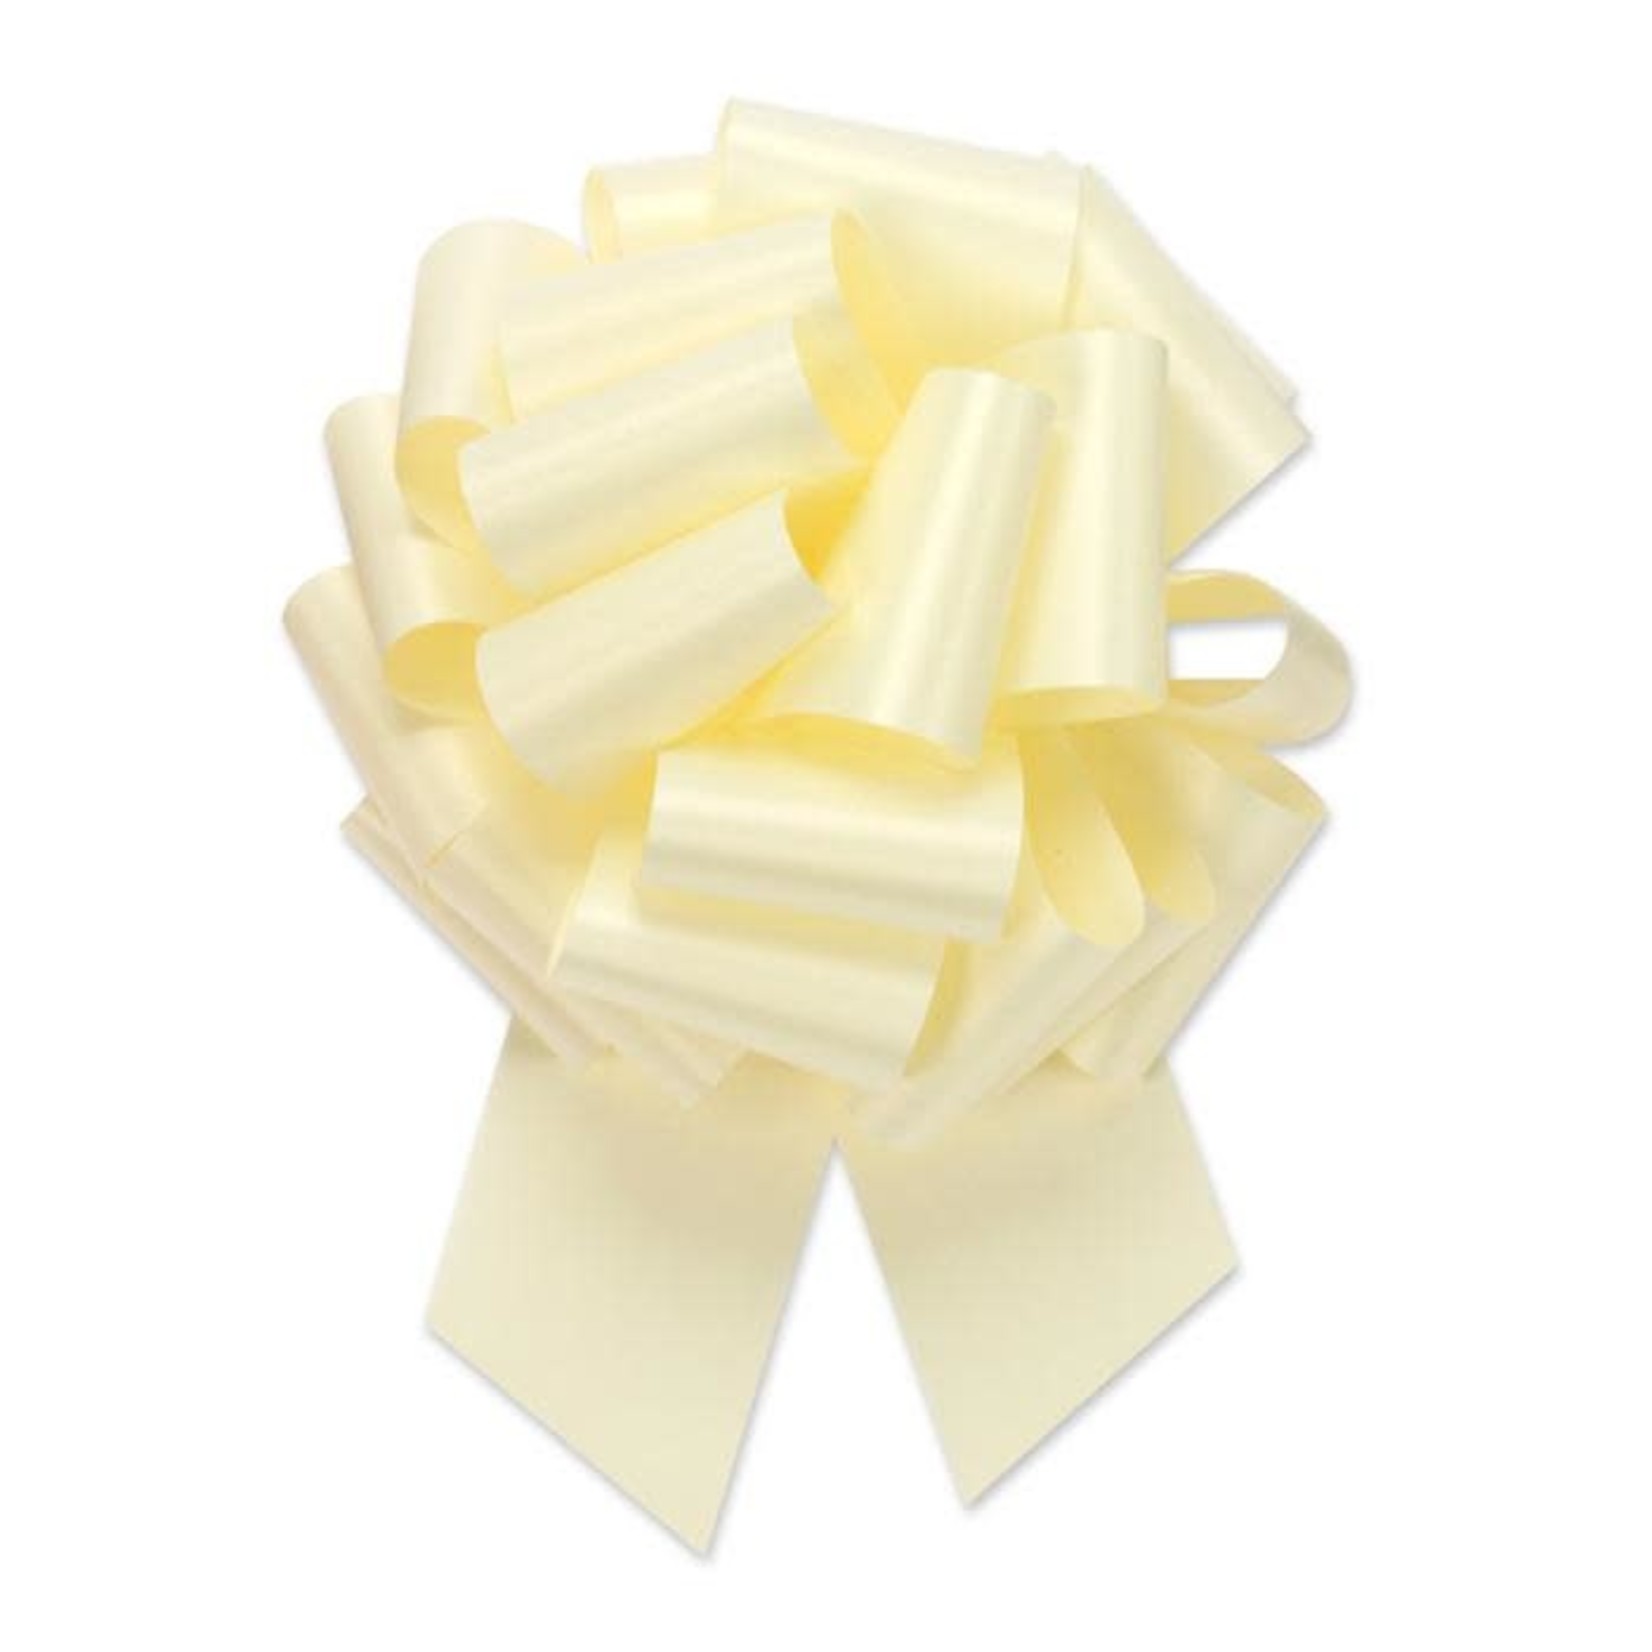 PERFECT BOW  #5 EGGSHELL, 7/8" ribbon width, 4" bow size, 18 loops